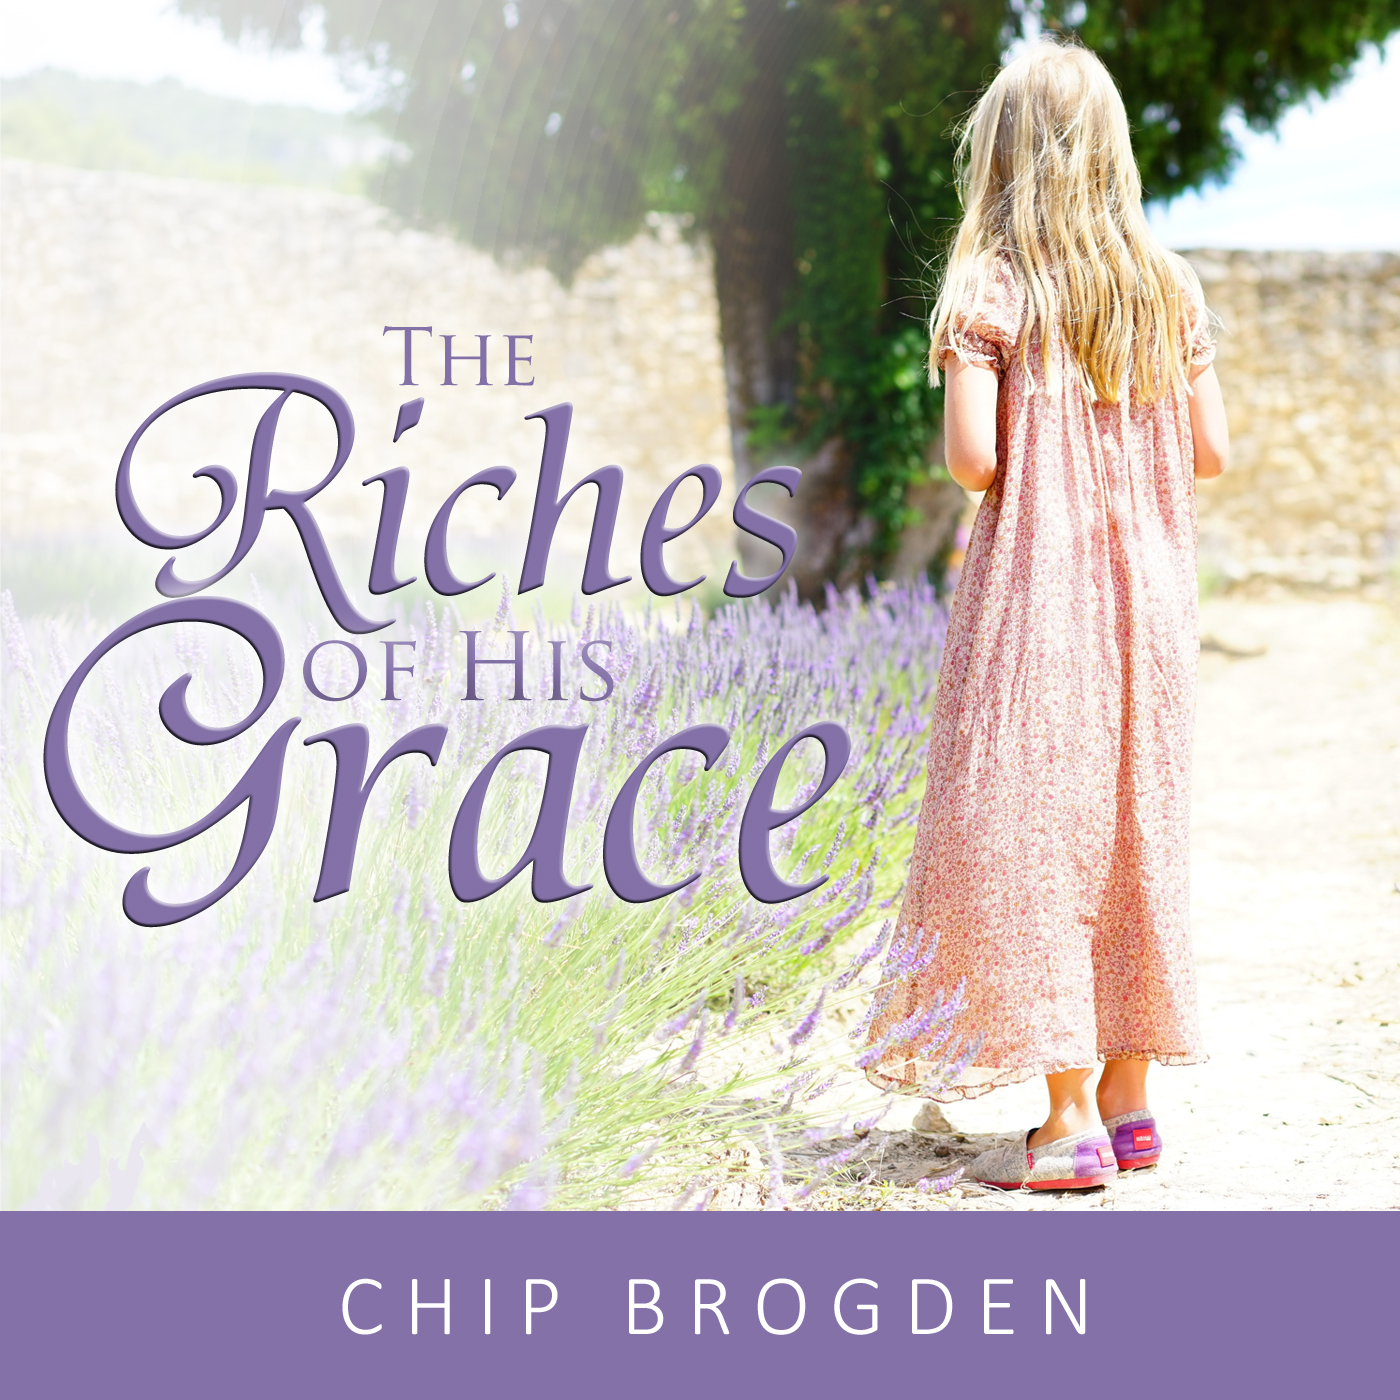 The Riches of His Grace